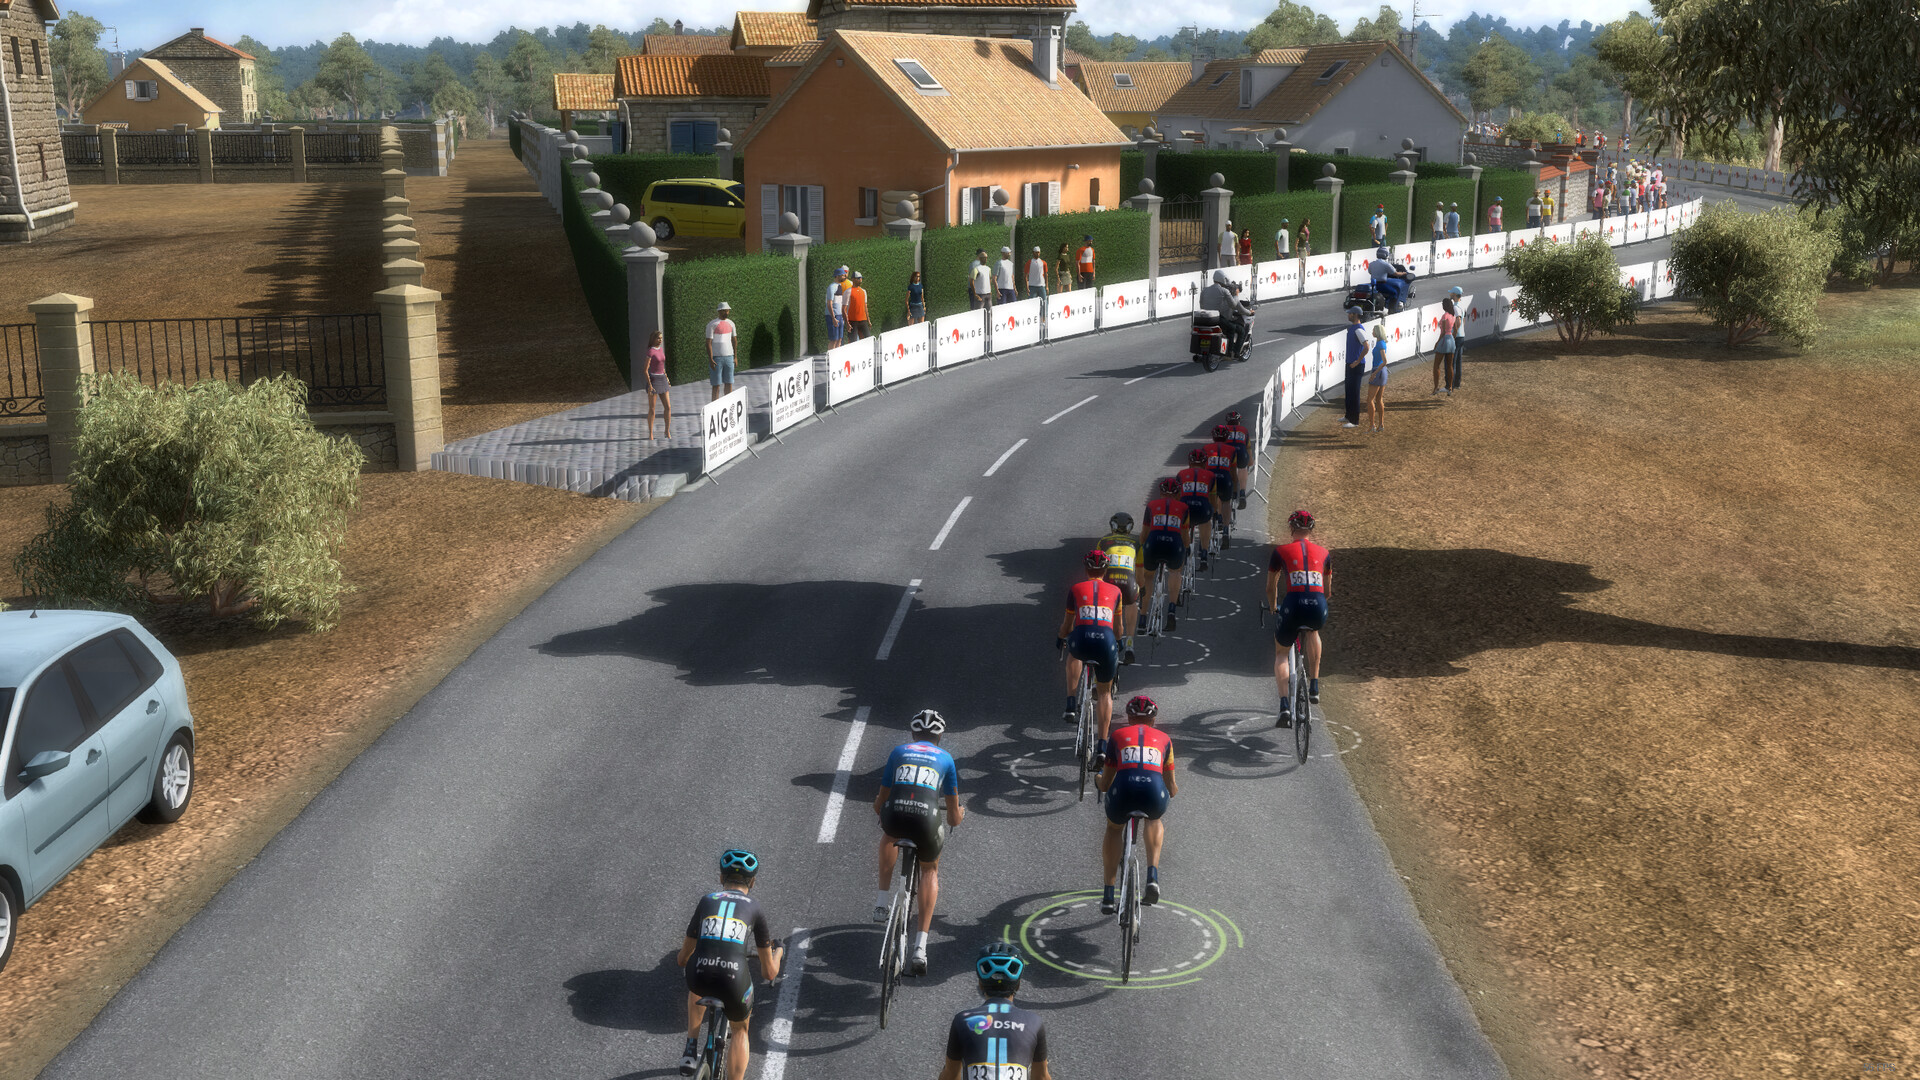 Pro Cycling Manager 2023 Steam CD Key